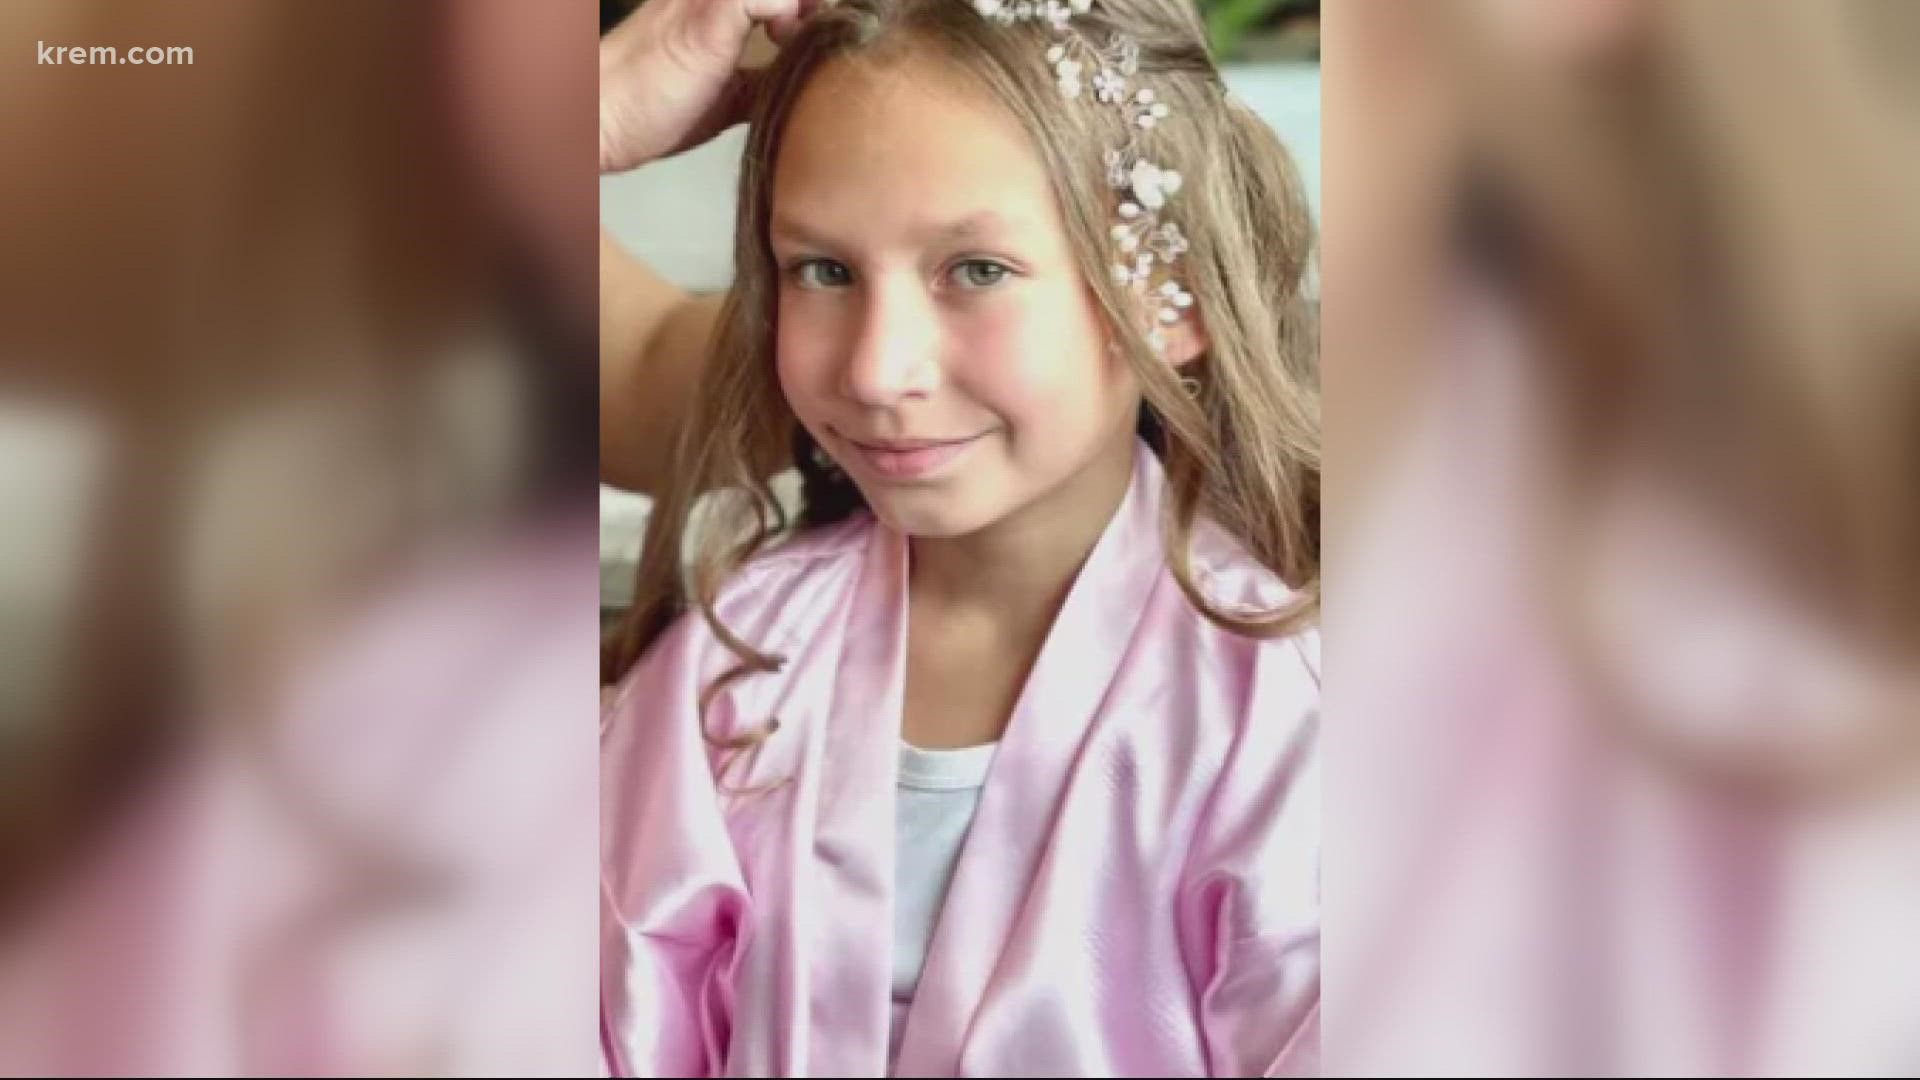 Washington Fish and Wildlife confirmed that nine-year-old Lily Kryzhanivskyy was attacked Saturday near Fruitland.